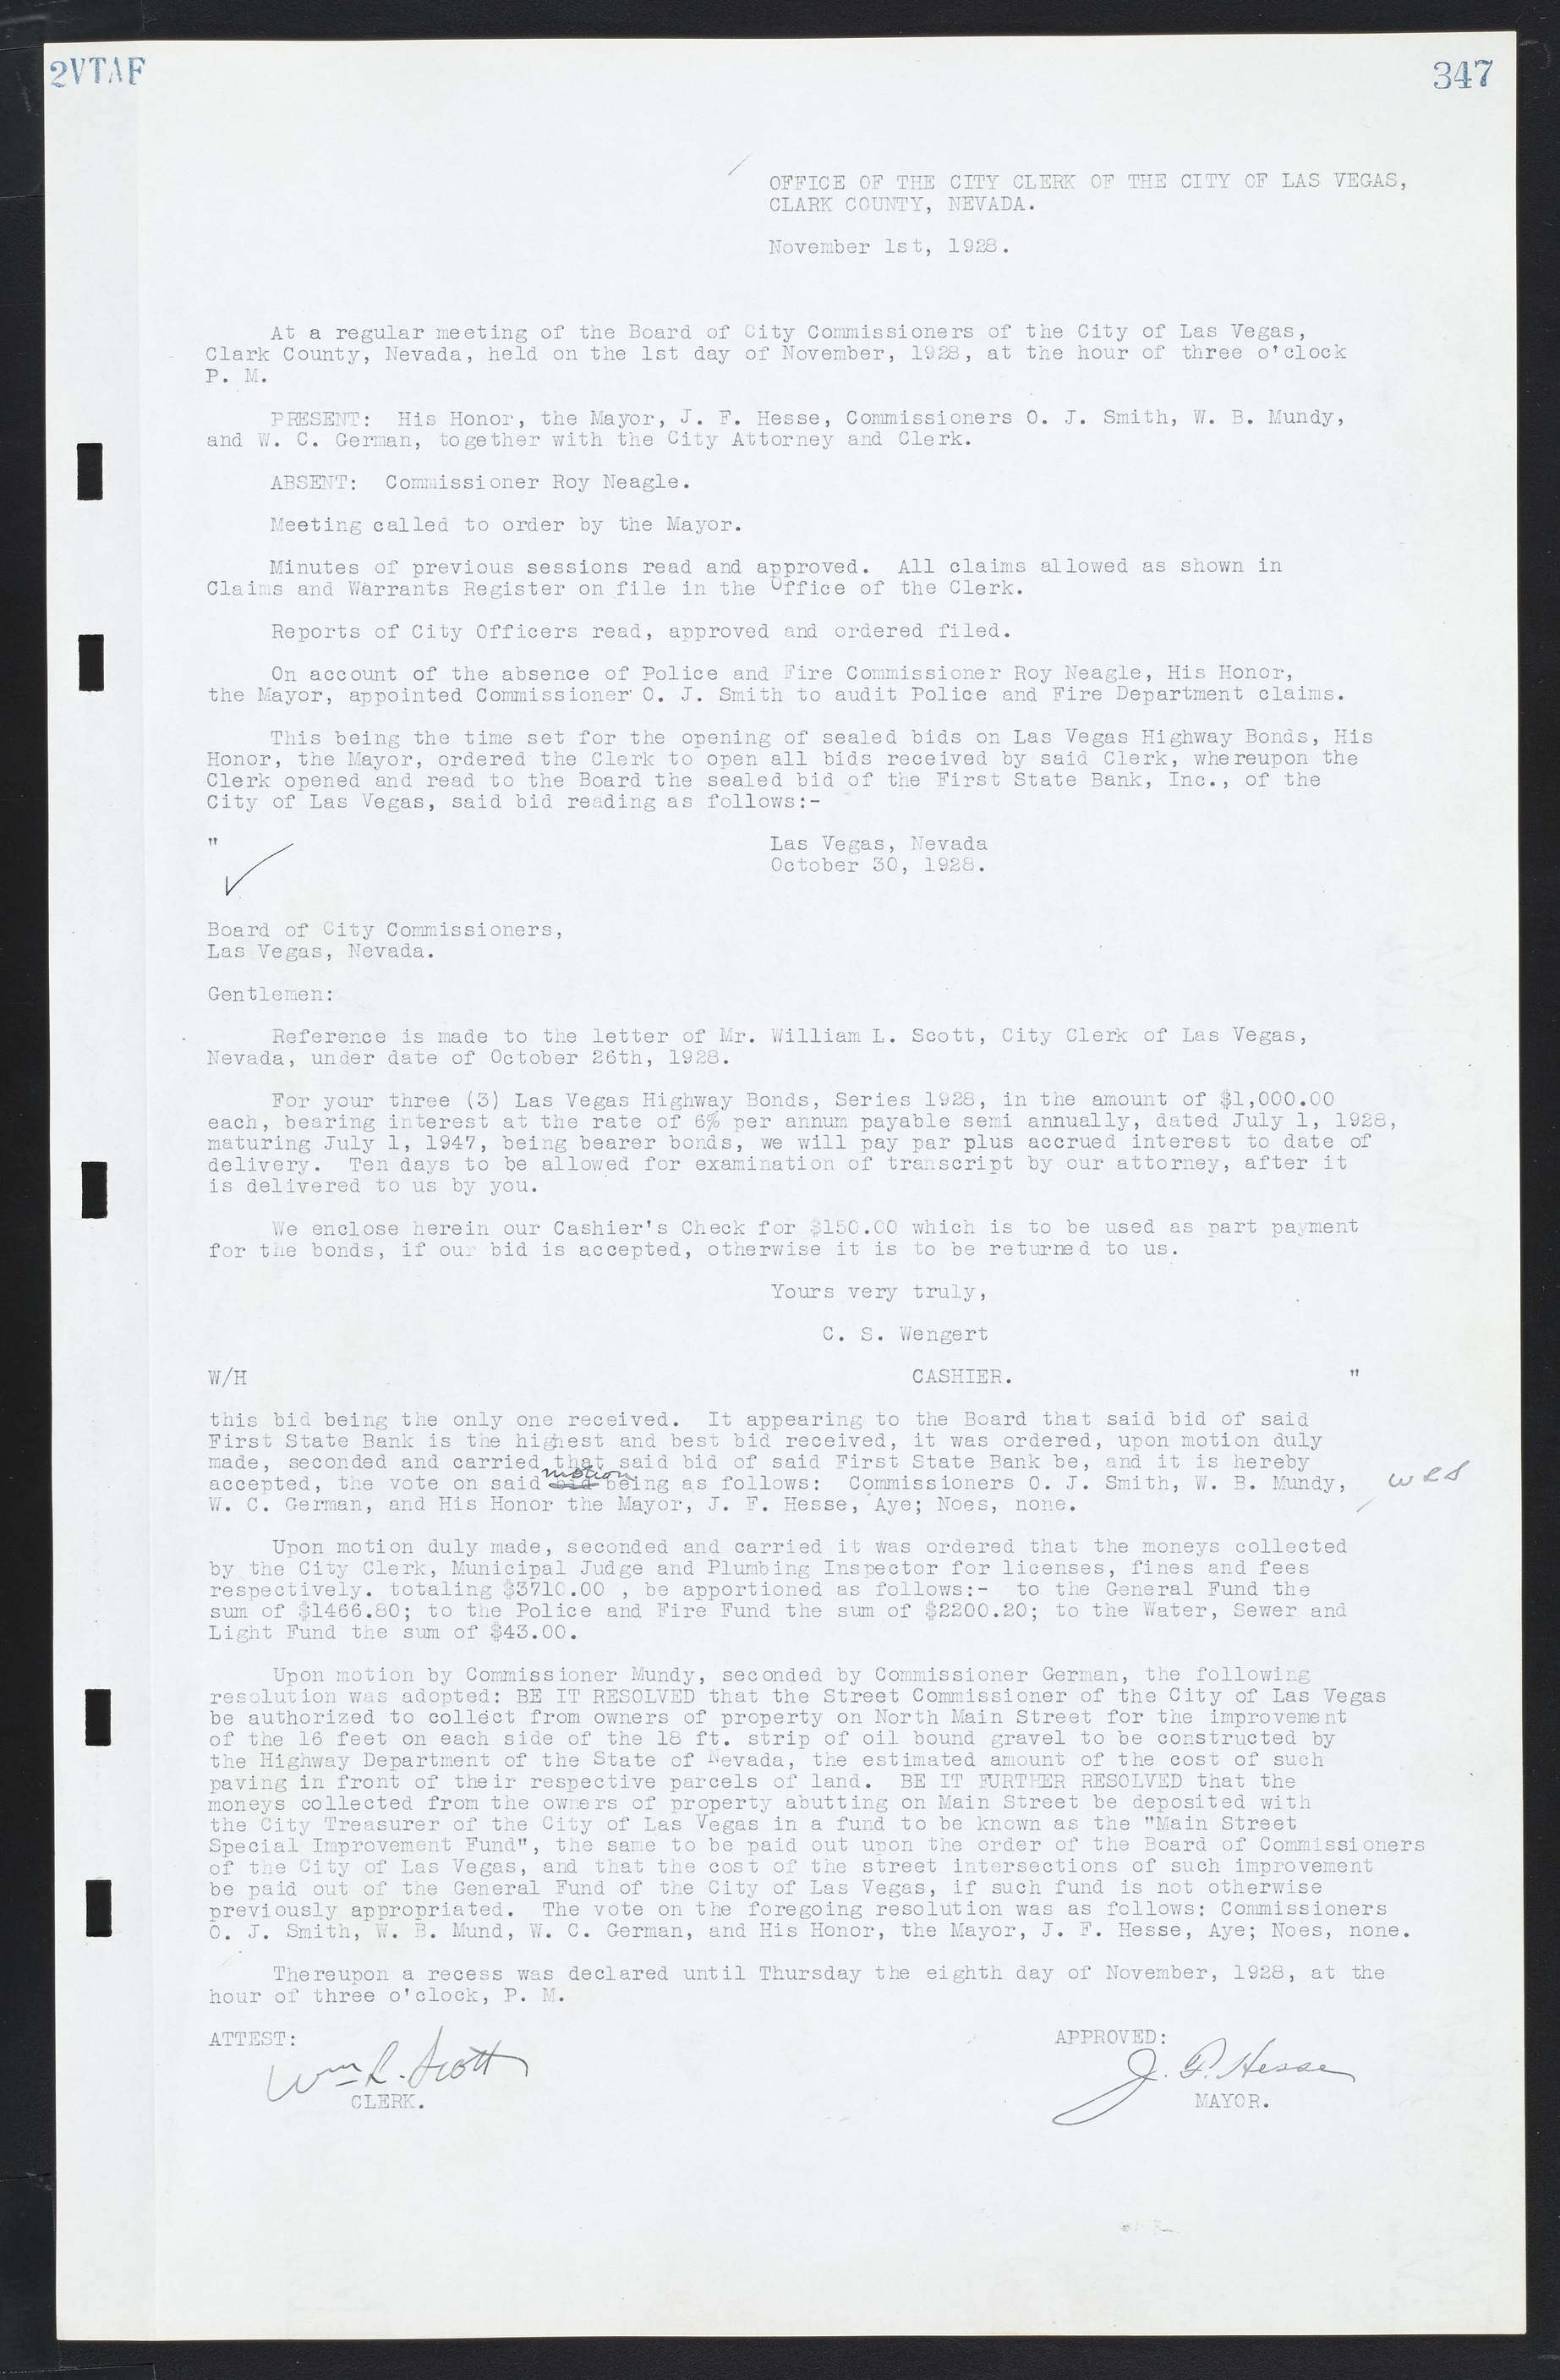 Las Vegas City Commission Minutes, March 1, 1922 to May 10, 1929, lvc000002-356